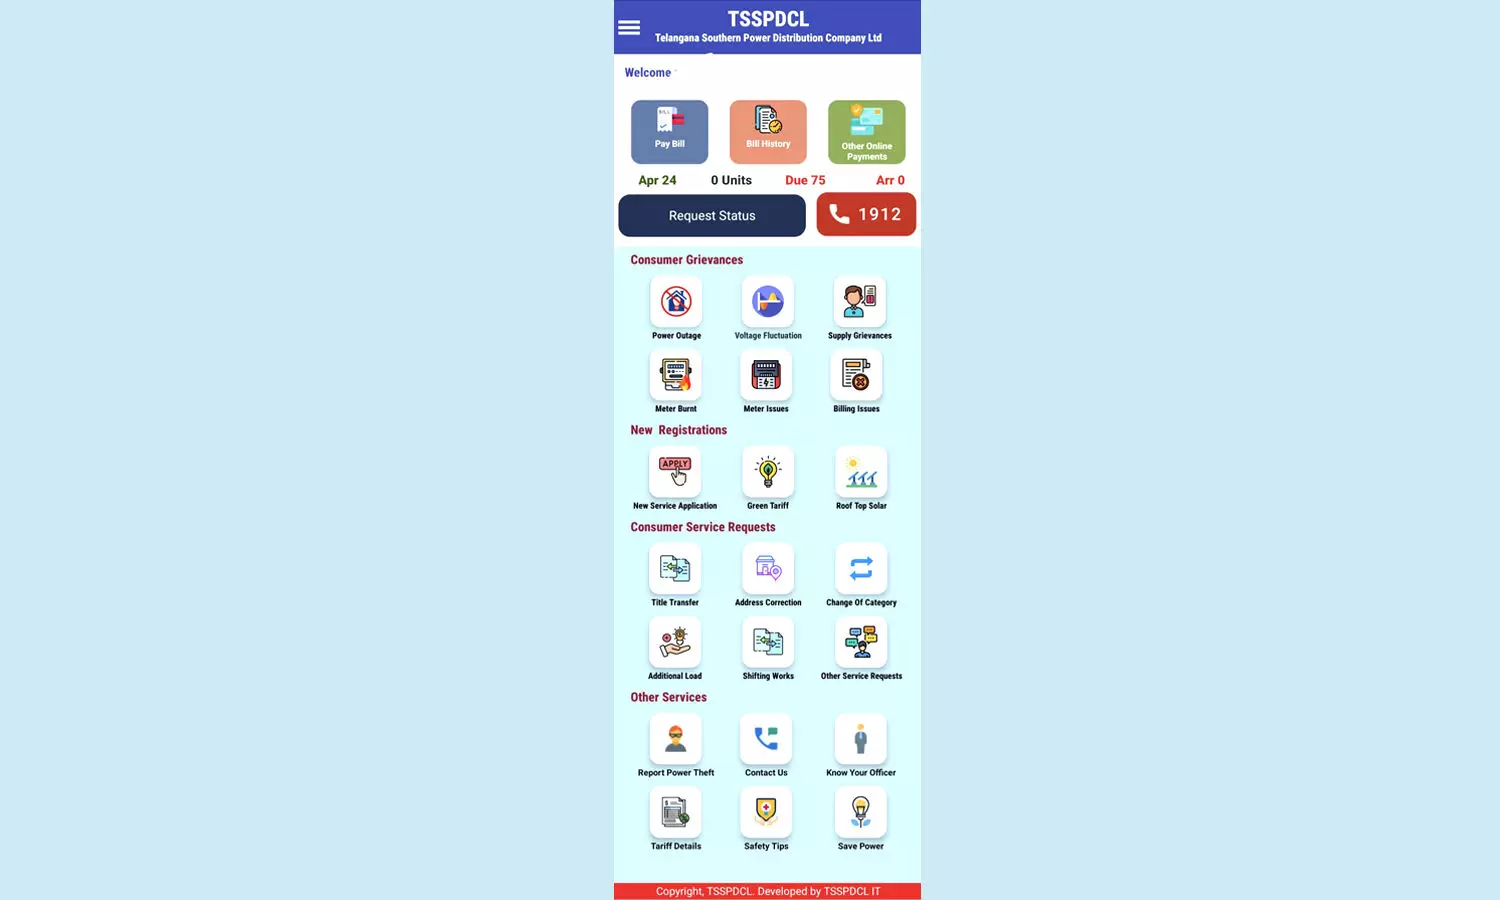 TSSPDCL unveils upgraded mobile app for instant consumer support in Telangana